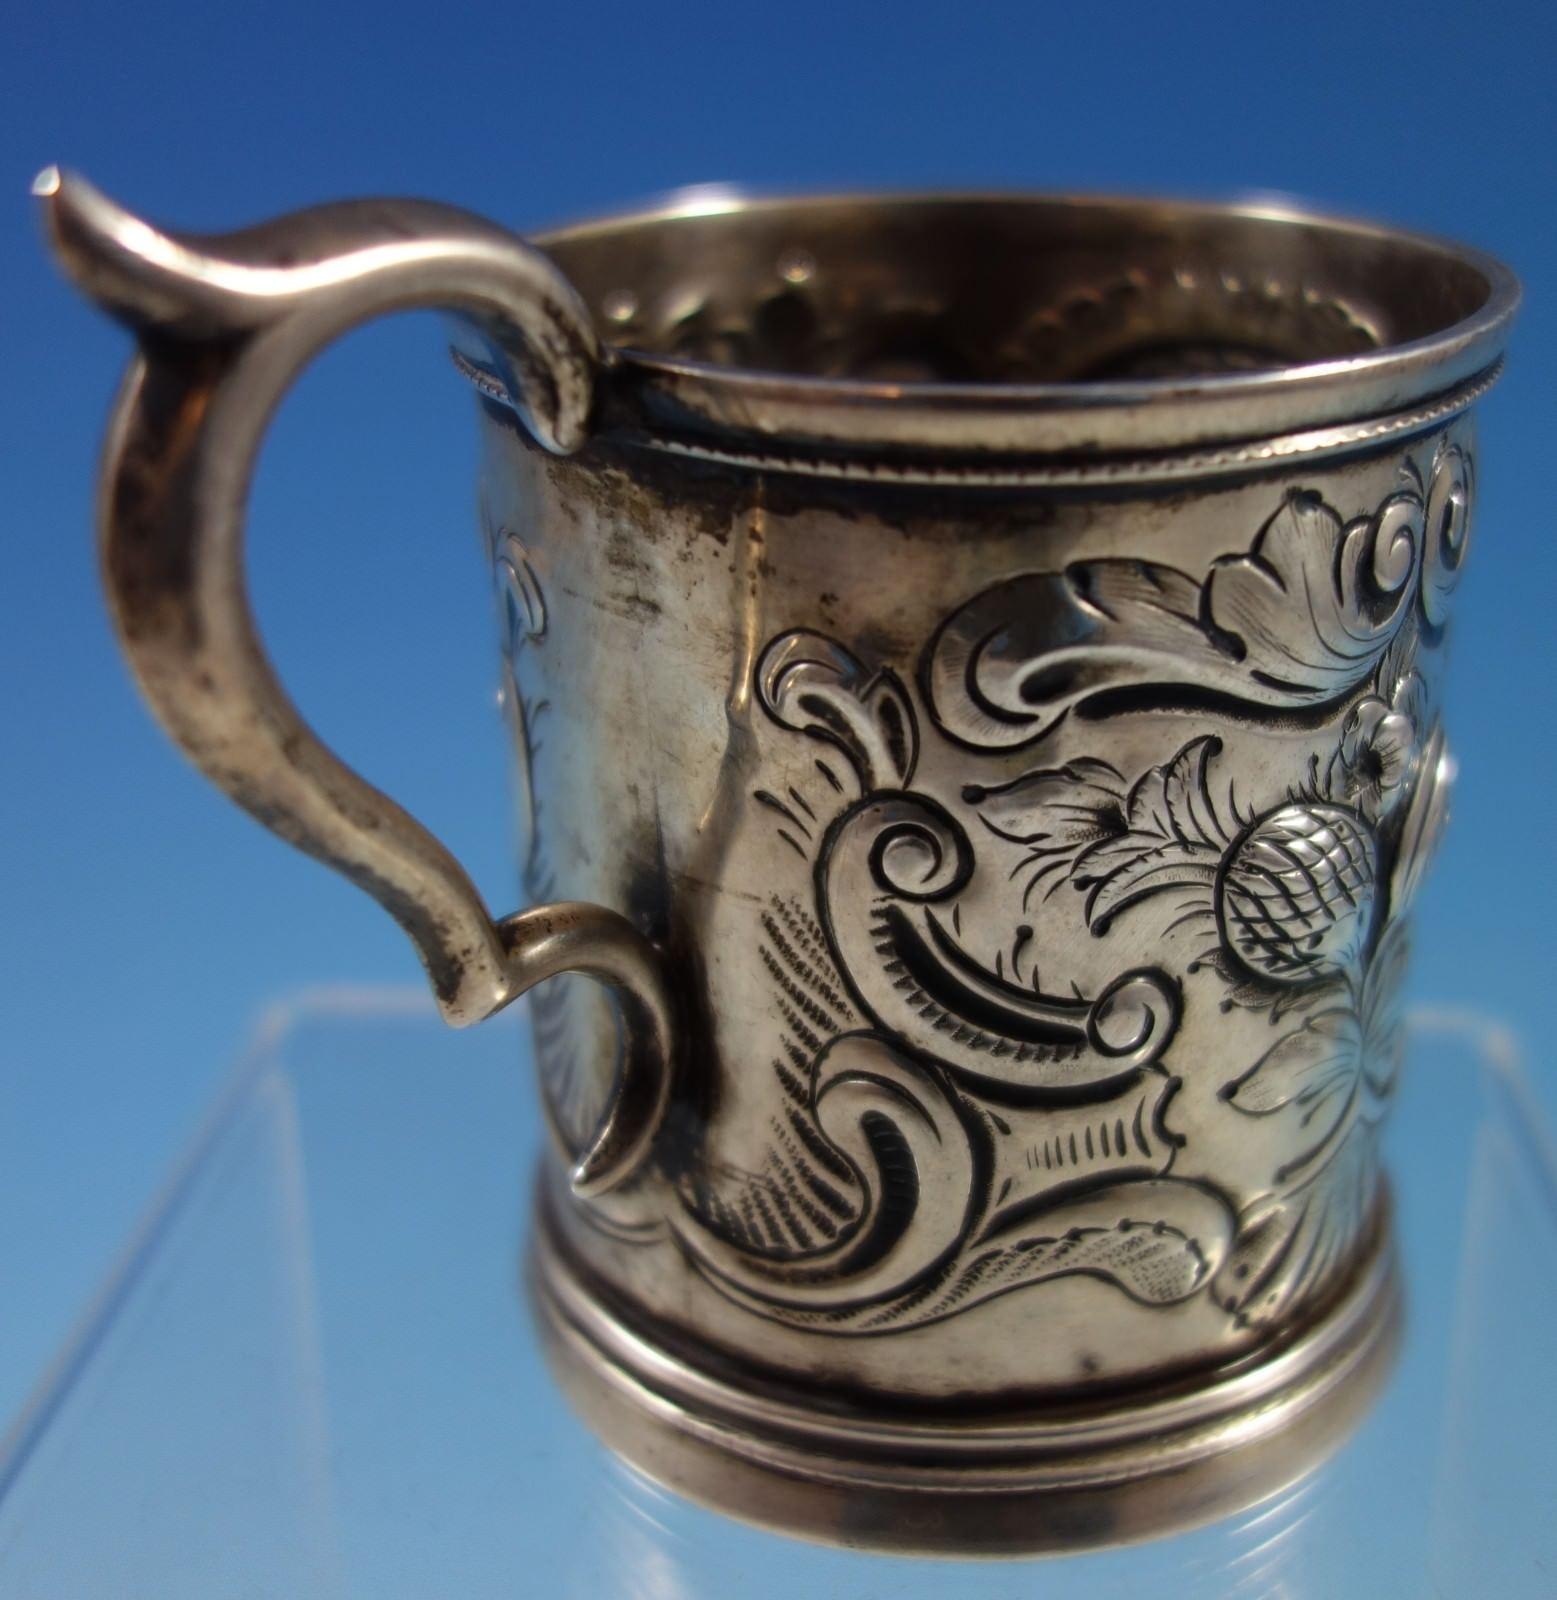 Coin silver baby cup. The cup has exquisite repoussed fruit and scrollwork and vintage monogram that reads daisy (see photos). The cup measures 3 1/2 x 4. It is in good vintage condition. Beautiful! 




